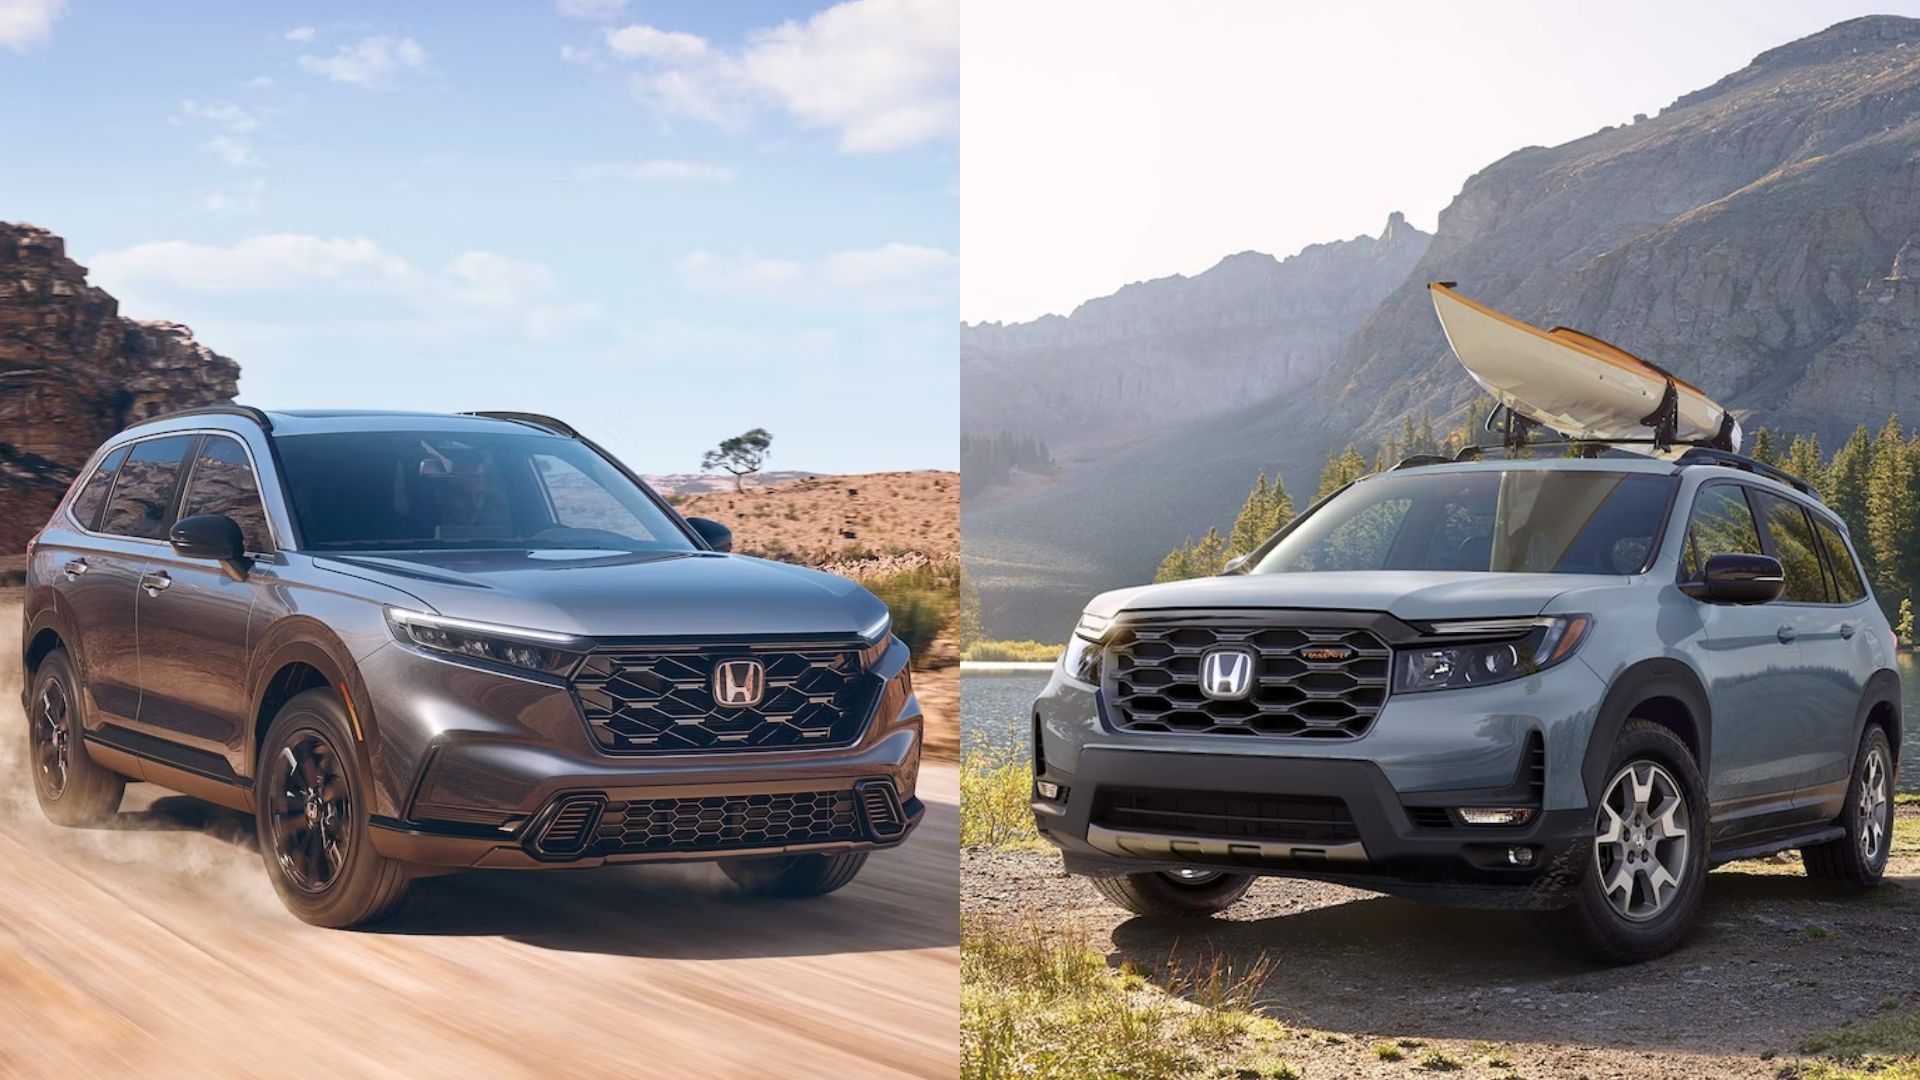 CRV Or Passport, Which Is The Better Honda Crossover SUV In 2023?